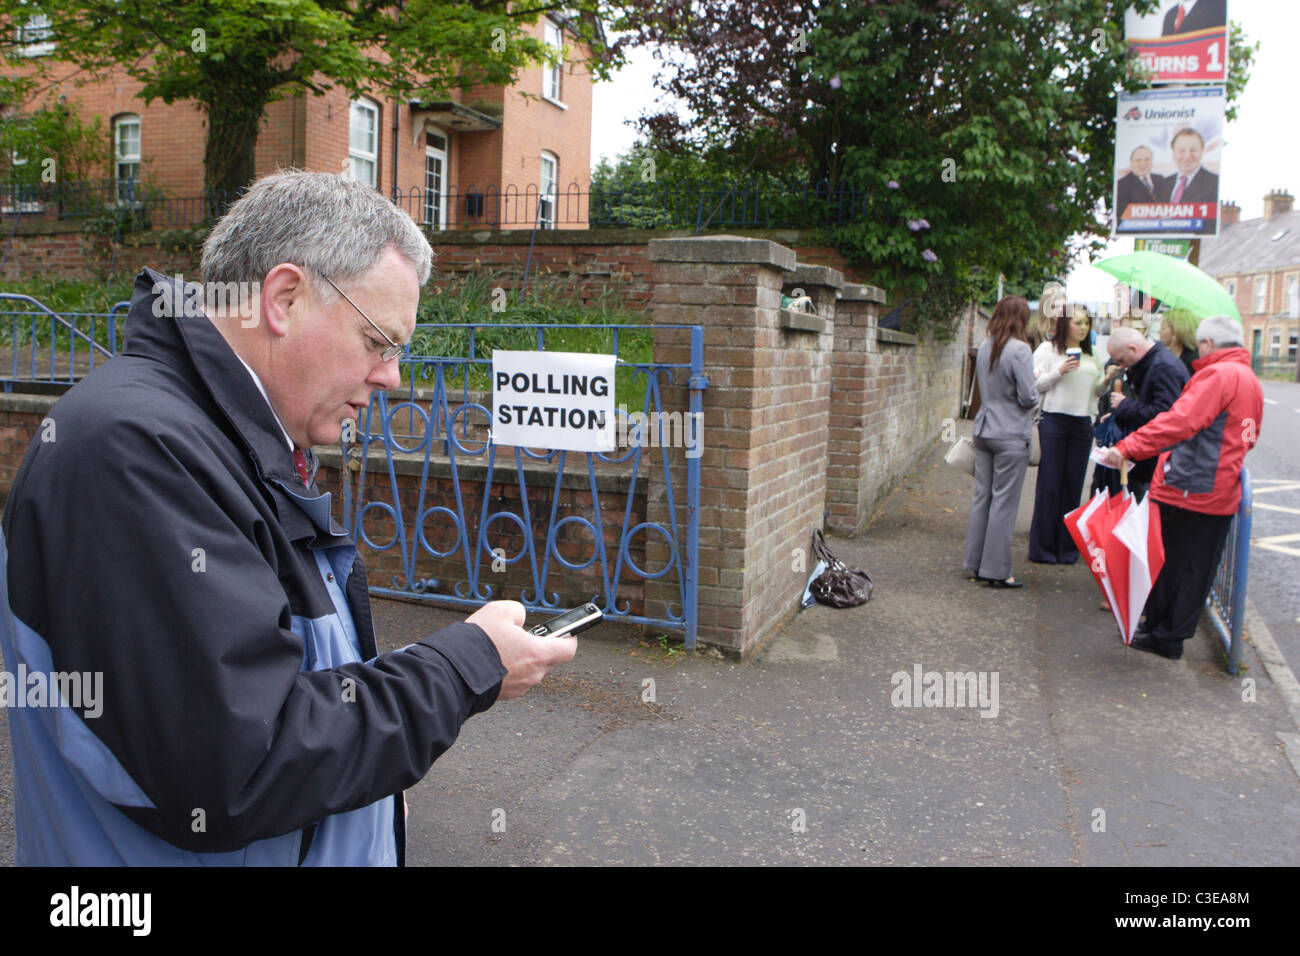 Crumlin, County Antrim, Northern Ireland. Thomas Burns MLA is a Social Democratic and Labour Party (SDLP) Stock Photo